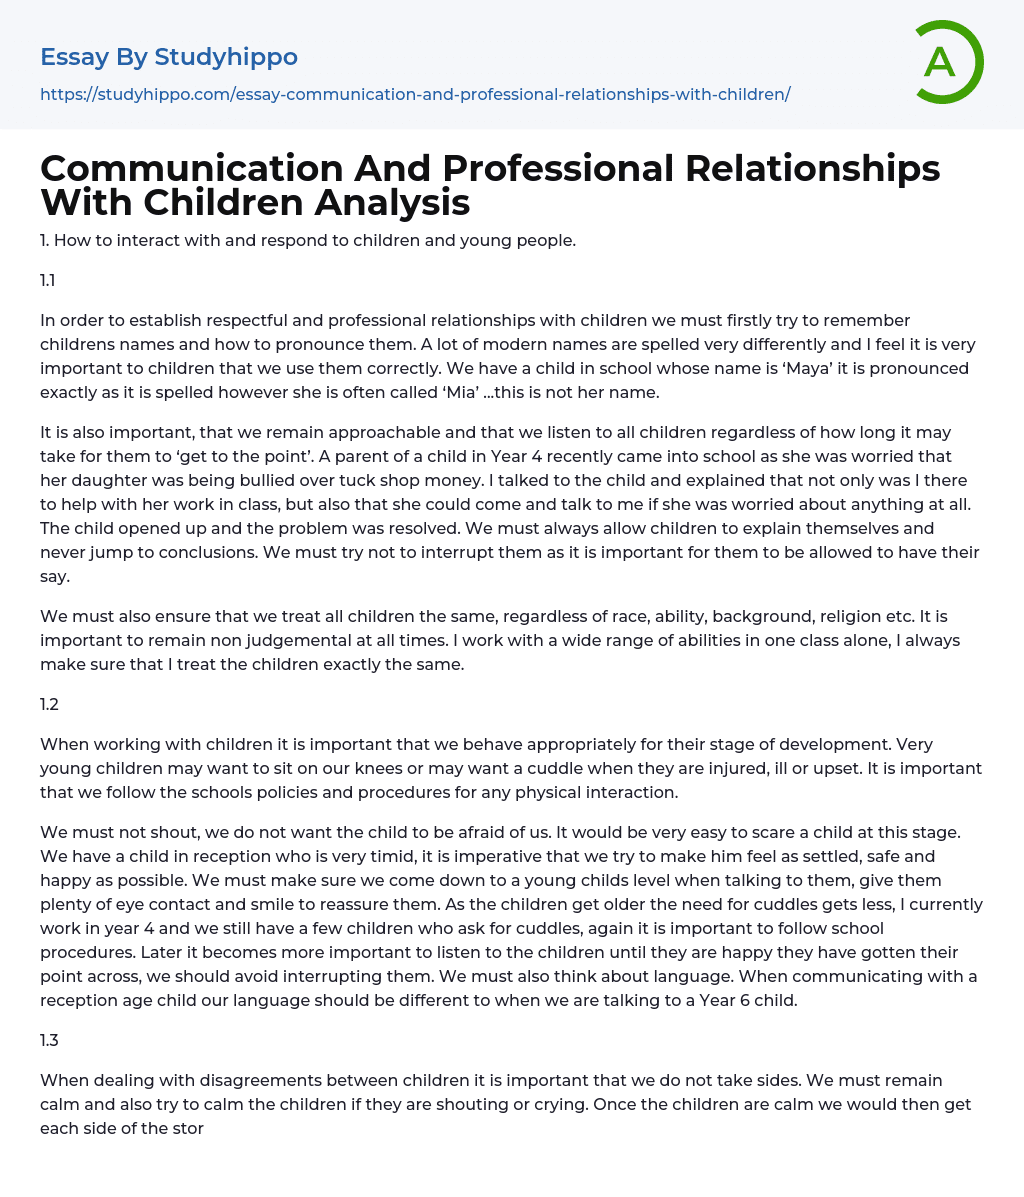 Communication And Professional Relationships With Children Analysis Essay Example